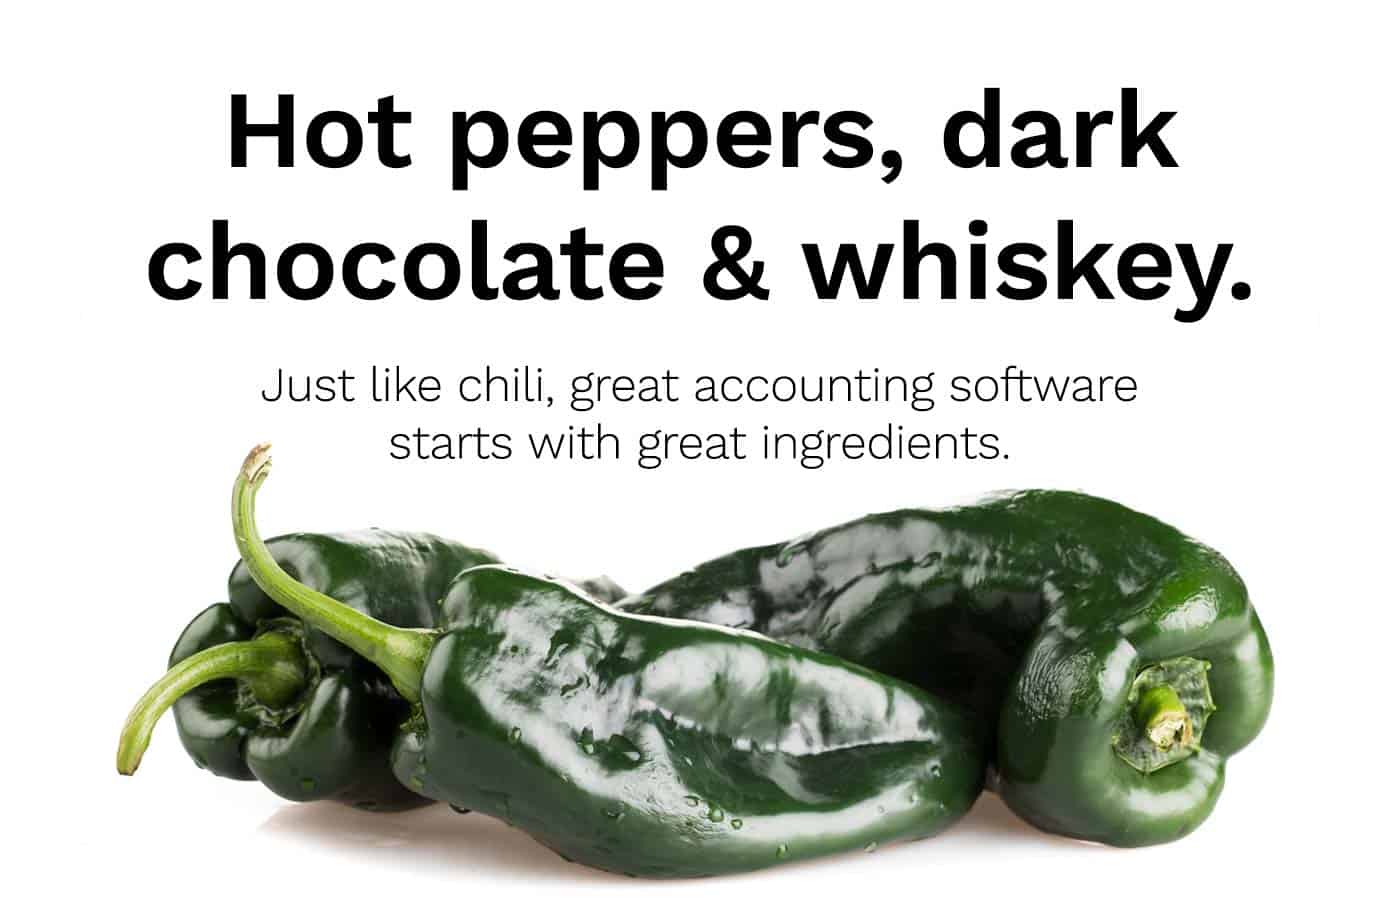 Hot peppers, dark chocolate & whiskey. Good ingredients make good accounting software.